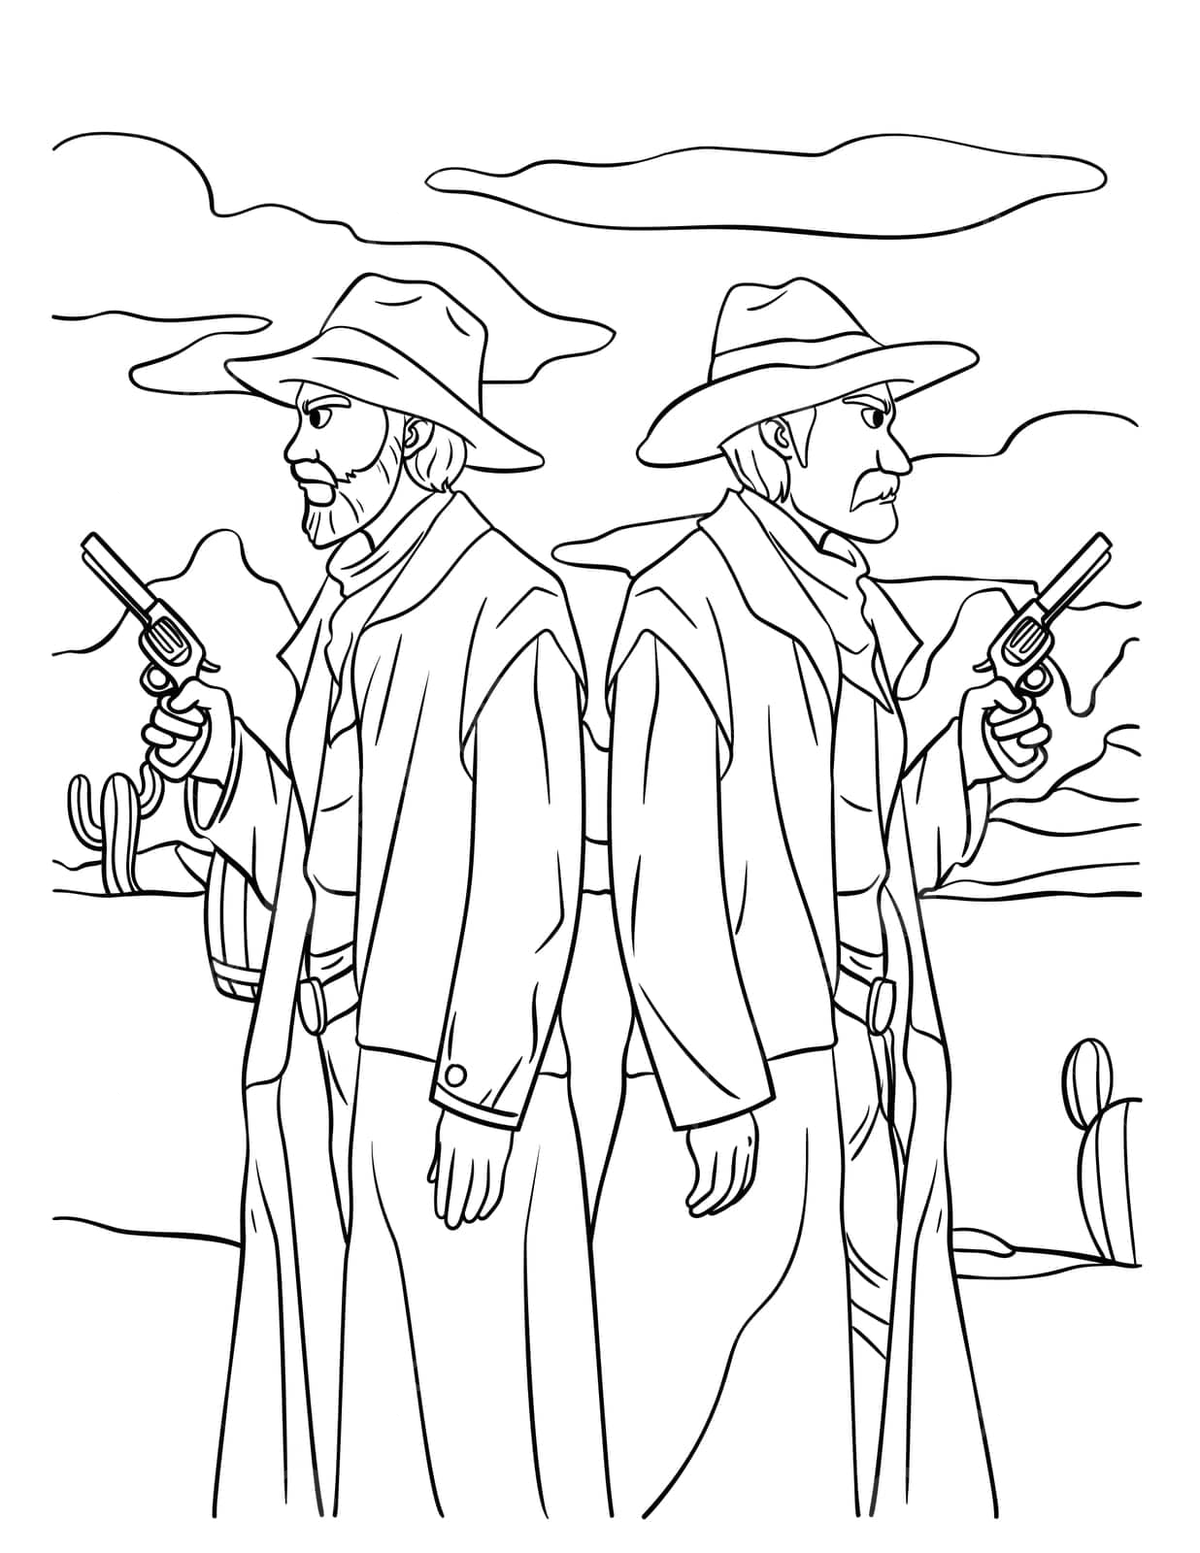 Cowboy duel coloring page for kids coloring book colour colouring book vector book drawing cow drawing cowboy drawing png and vector with transparent background for free download